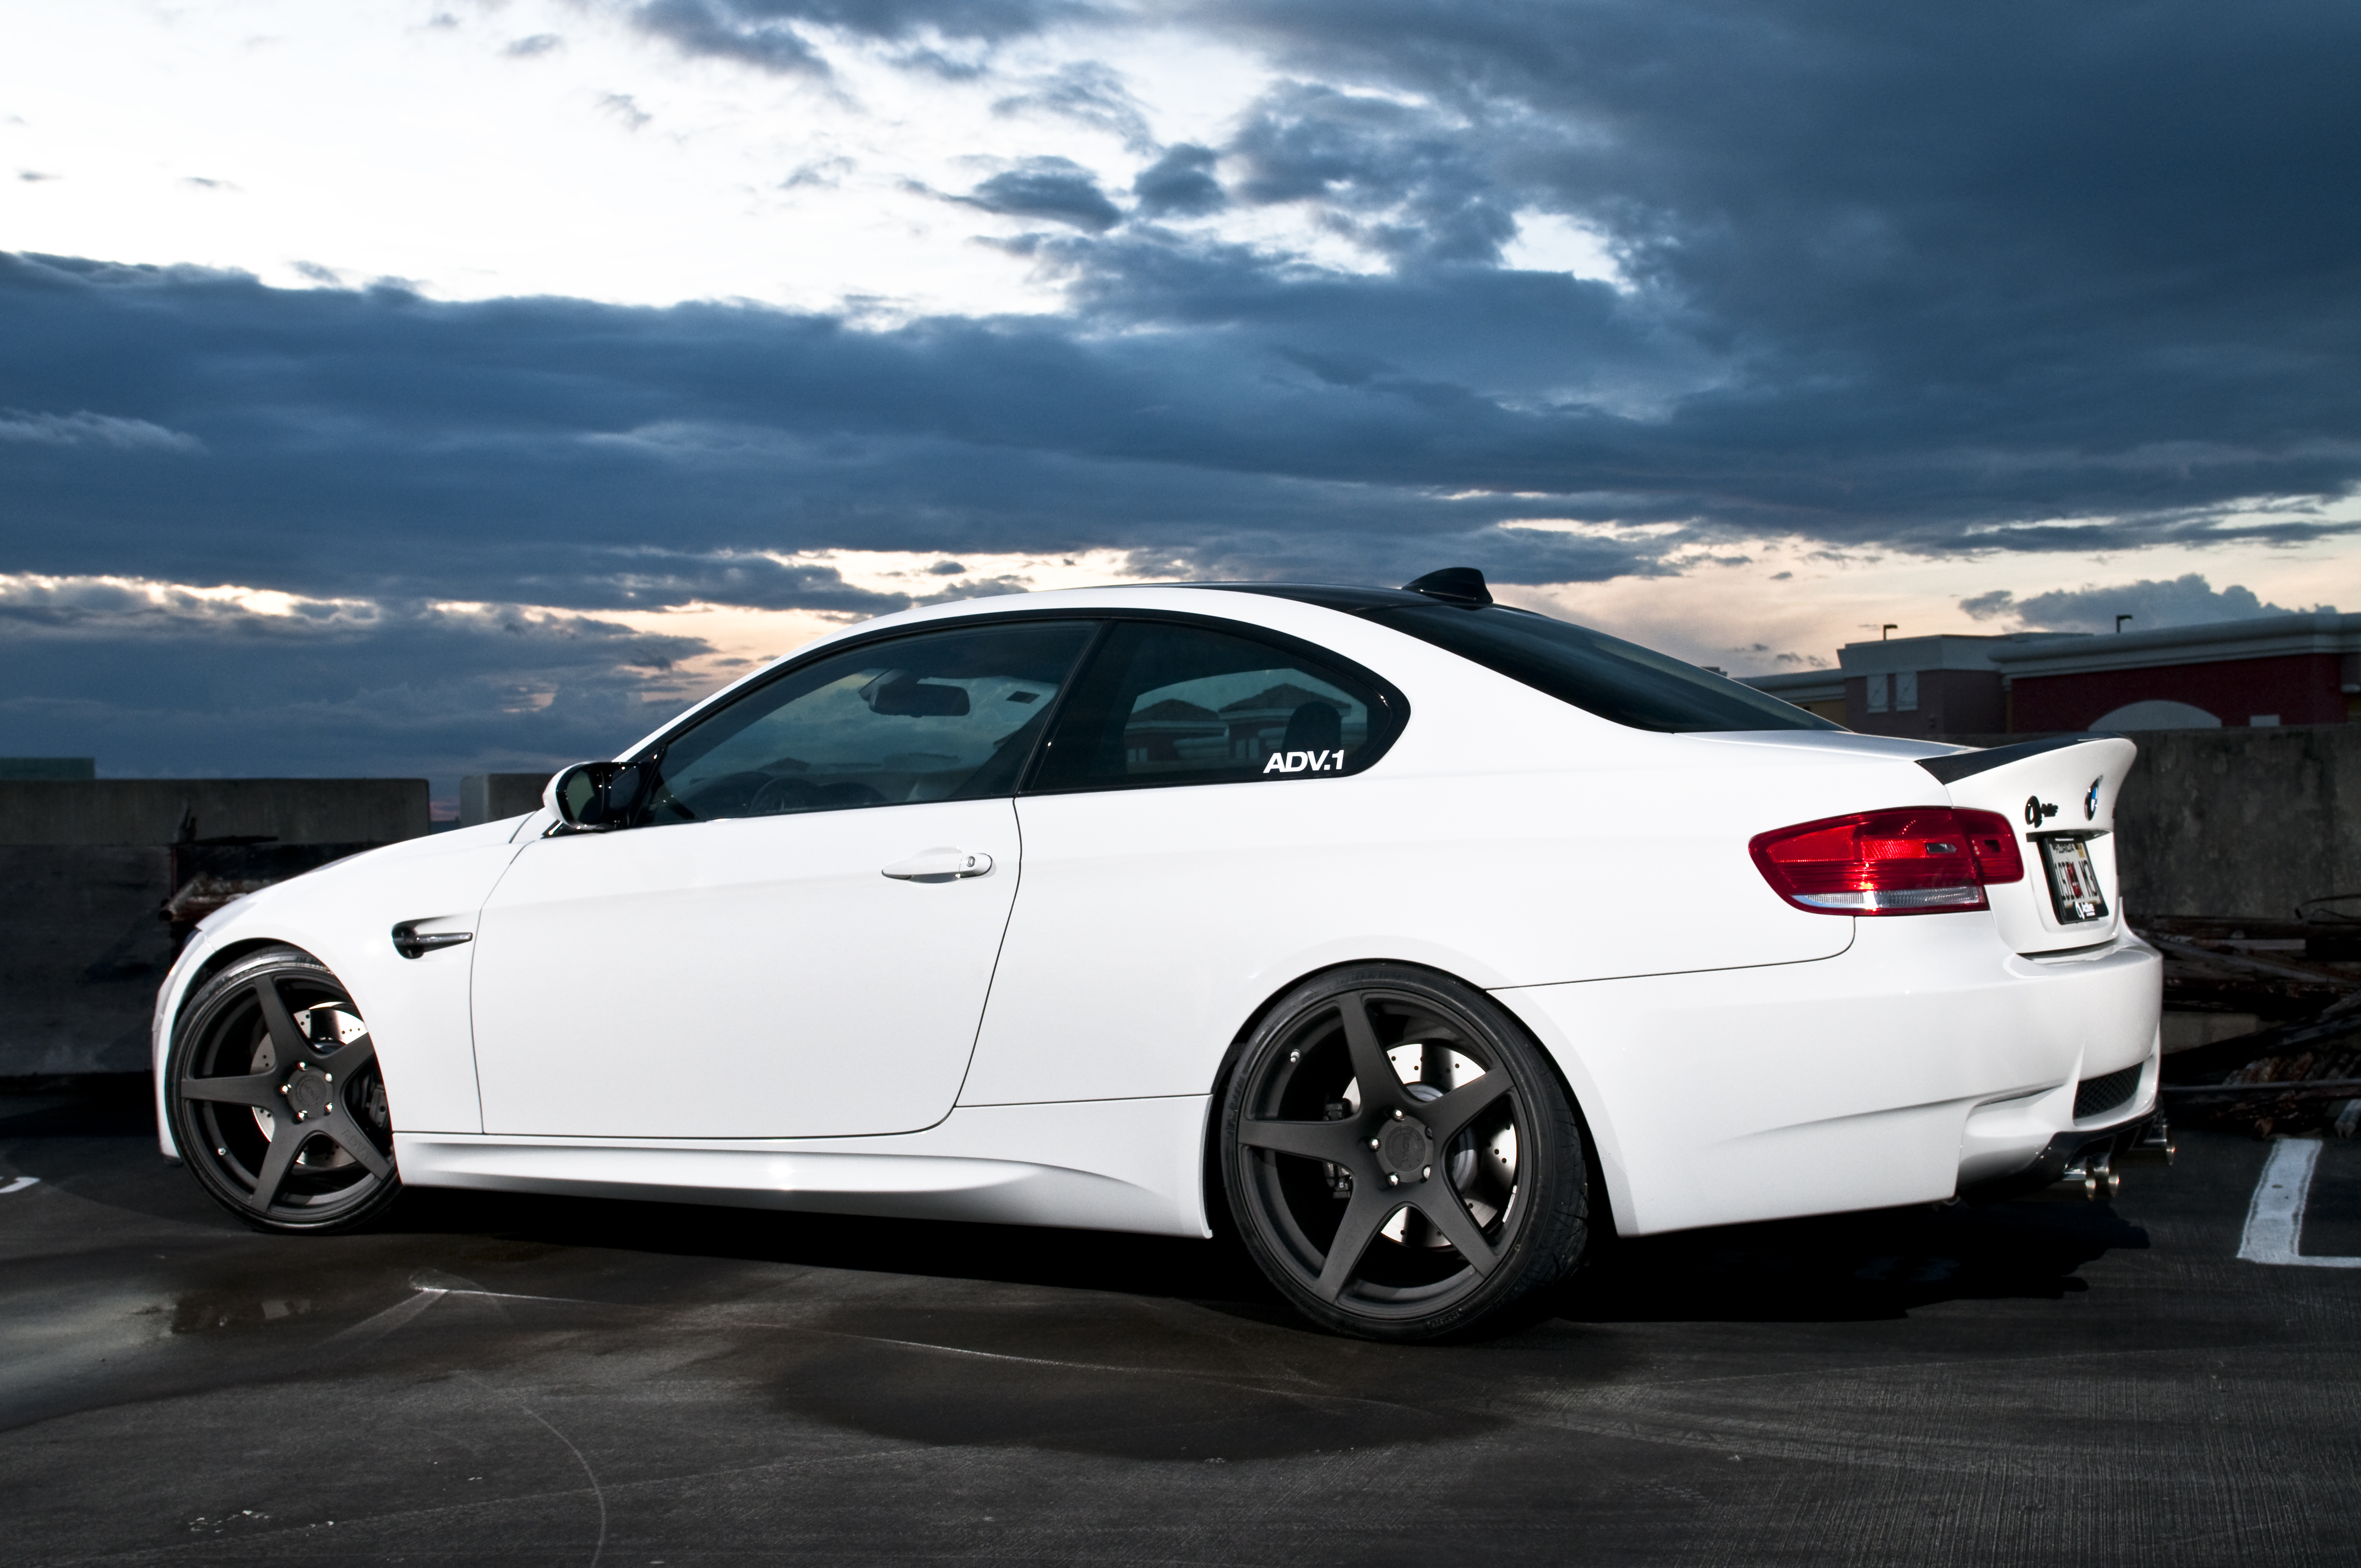 ADV.1 Wheels, and Active Autowerke BMW M3 Shoot | Flickr - Photo ...